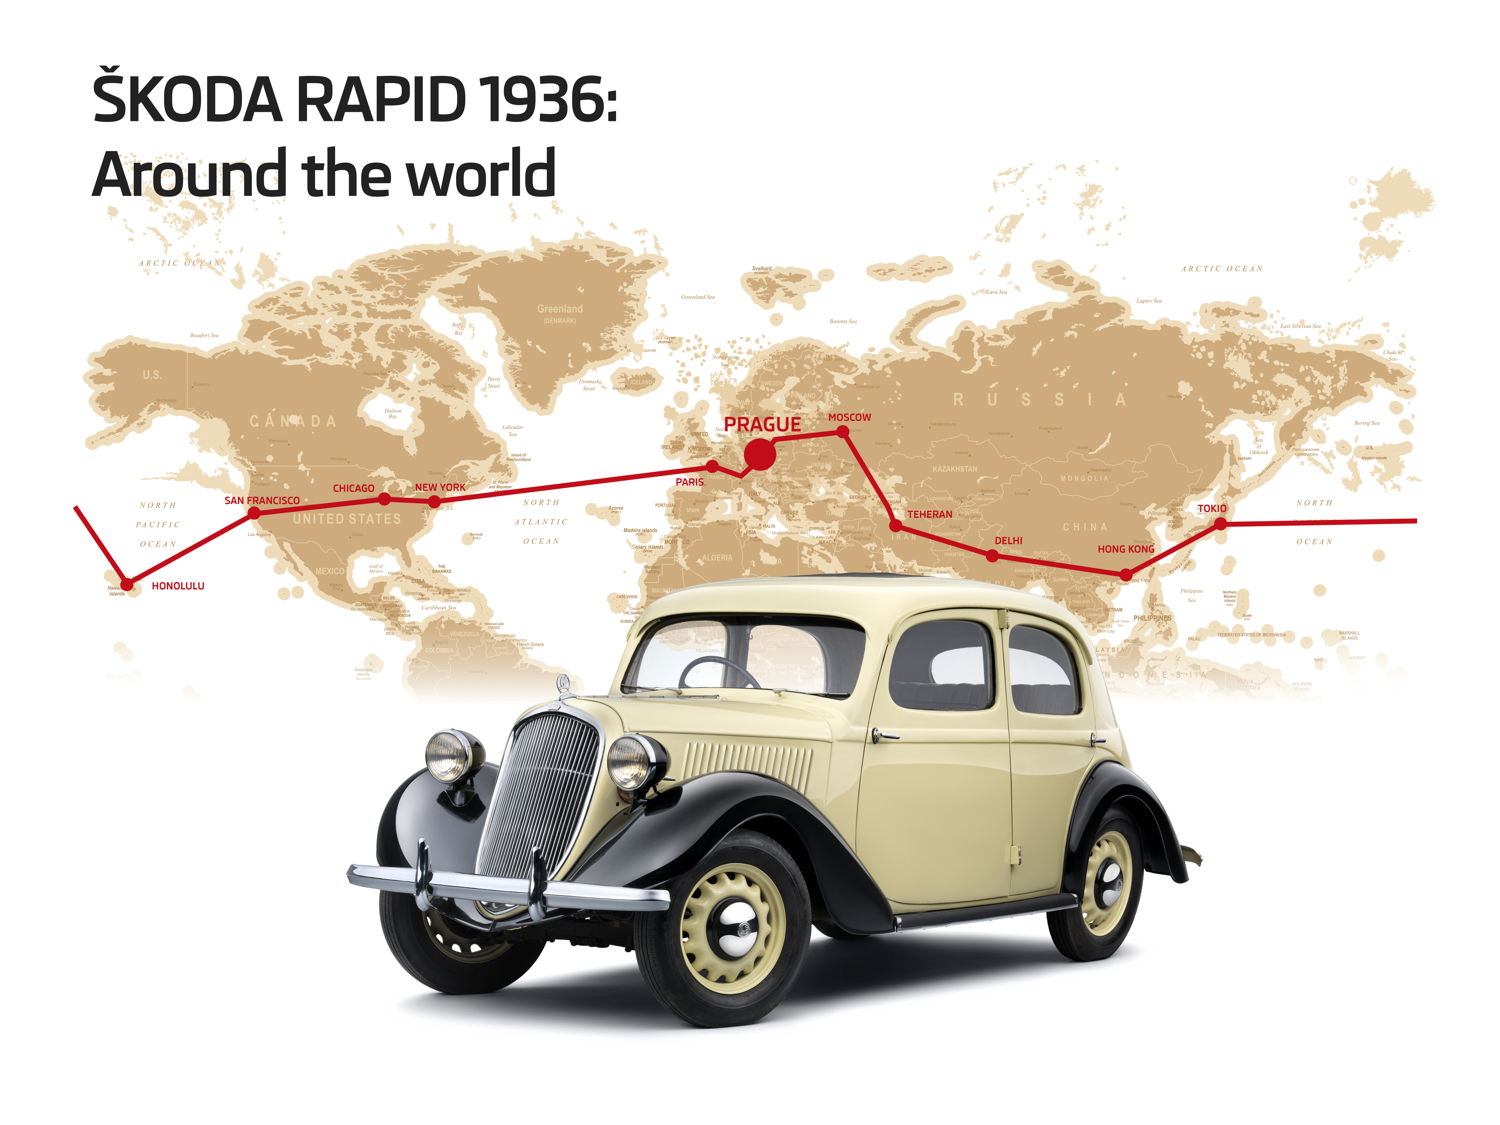 Eighty years ago the ŠKODA RAPID completed a drive around the world. During the trip the travellers B.J.Procházka and J.Kubias relied on a car of a similar type as you can see in the picture, only minimally modified.